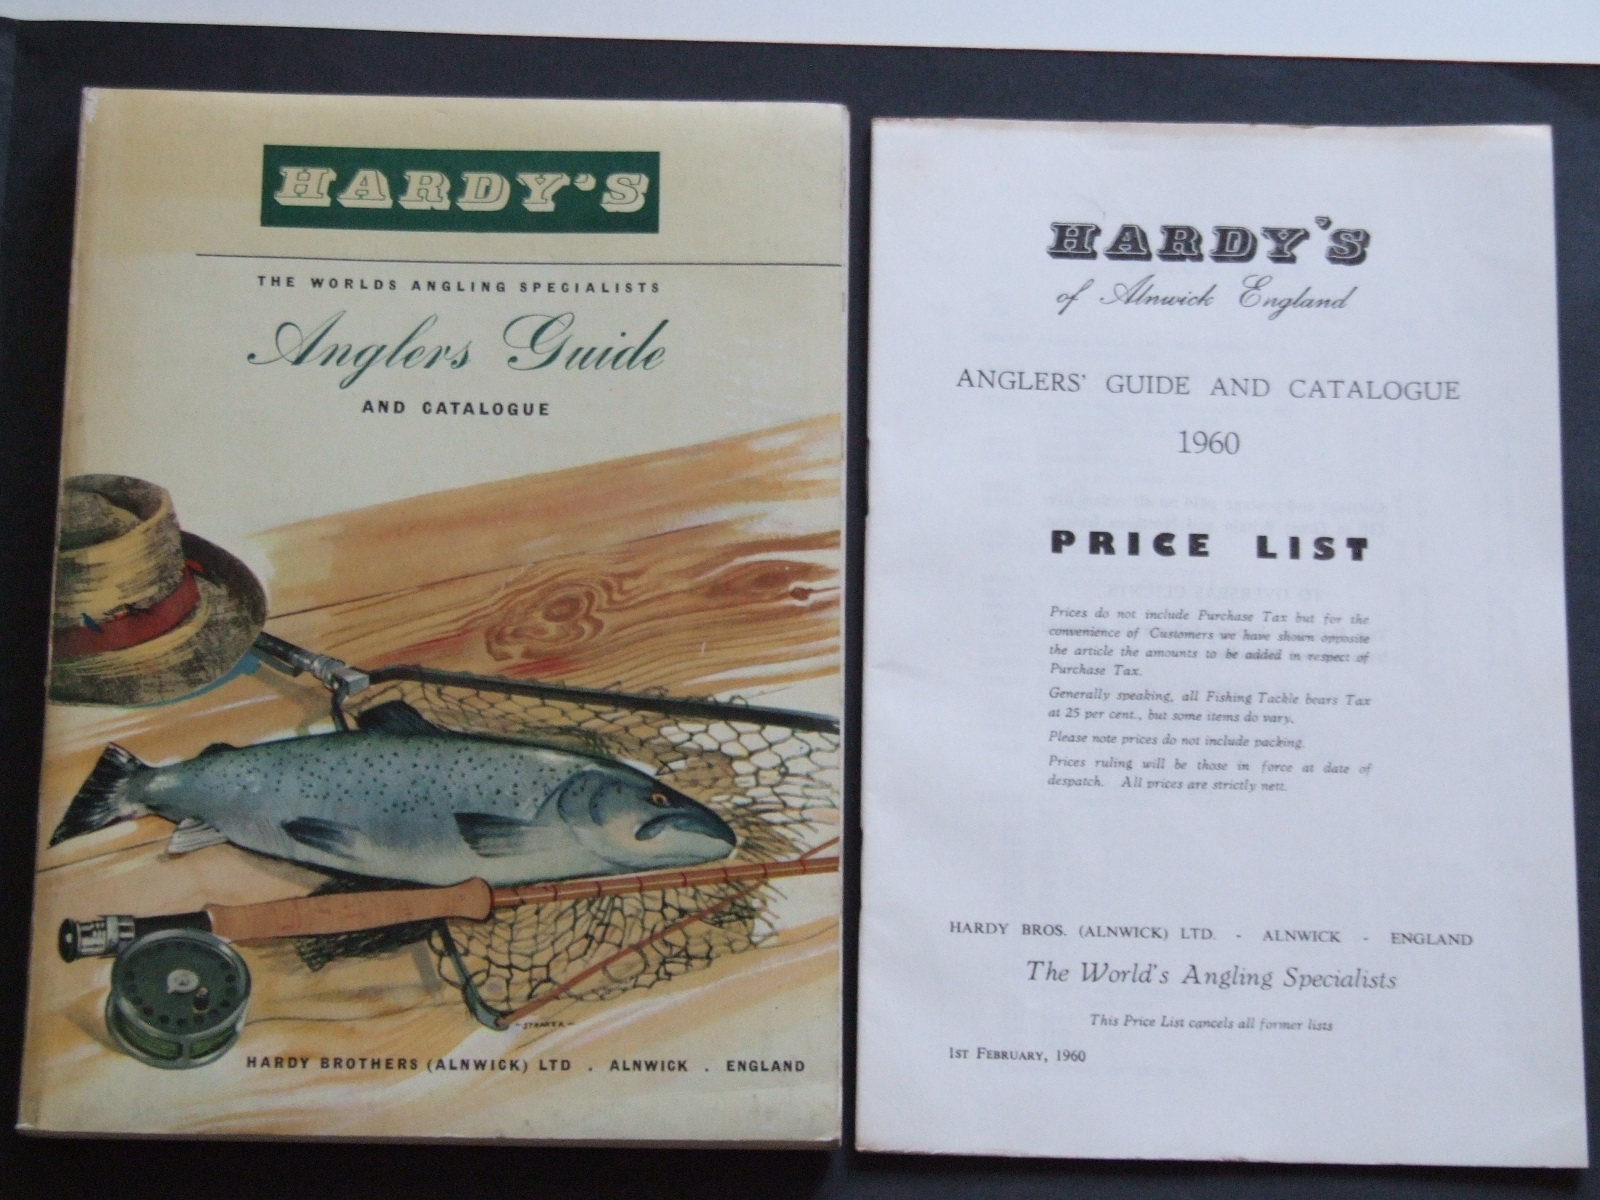 Hardy VINTAGE HARDY ADVERTISING FISHING CATALOGUE TACKLE GUIDE FOR 2004 